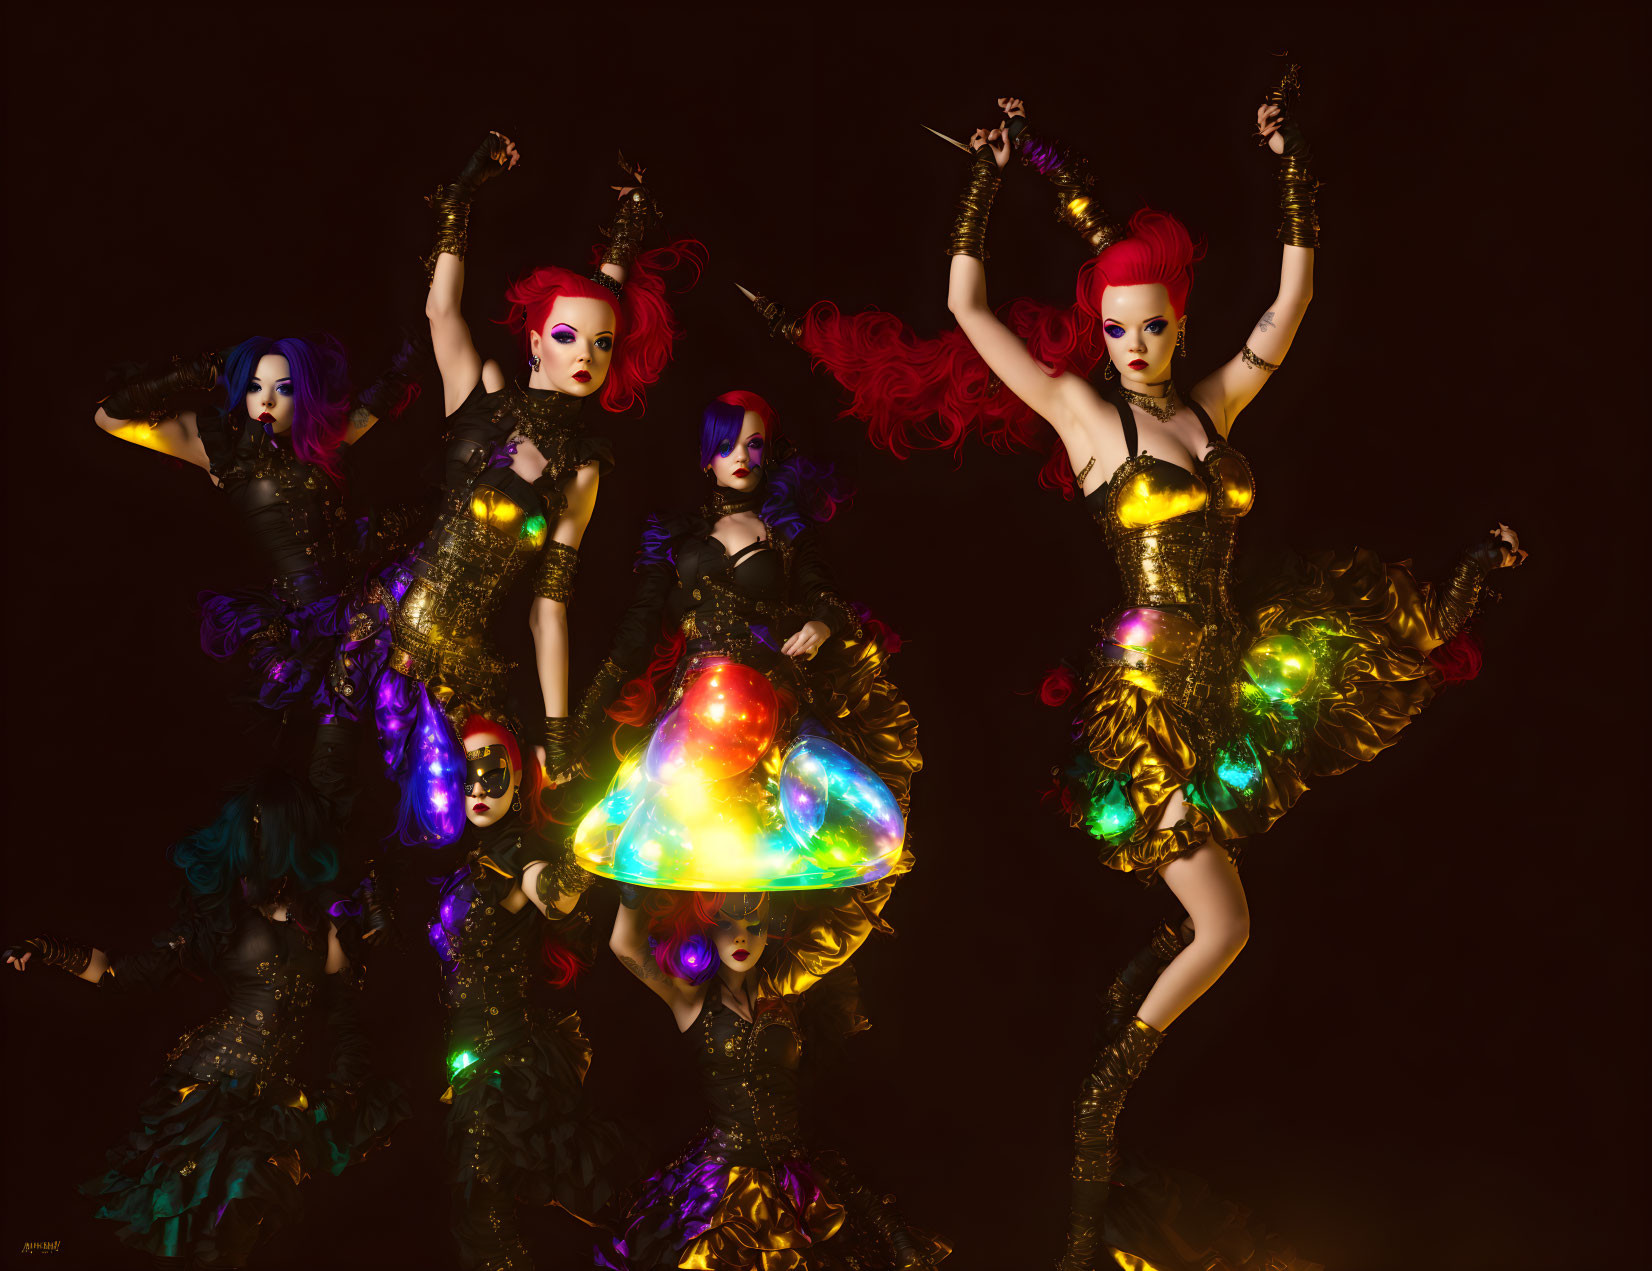 Four performers in vibrant costumes with dynamic poses against dark backdrop.